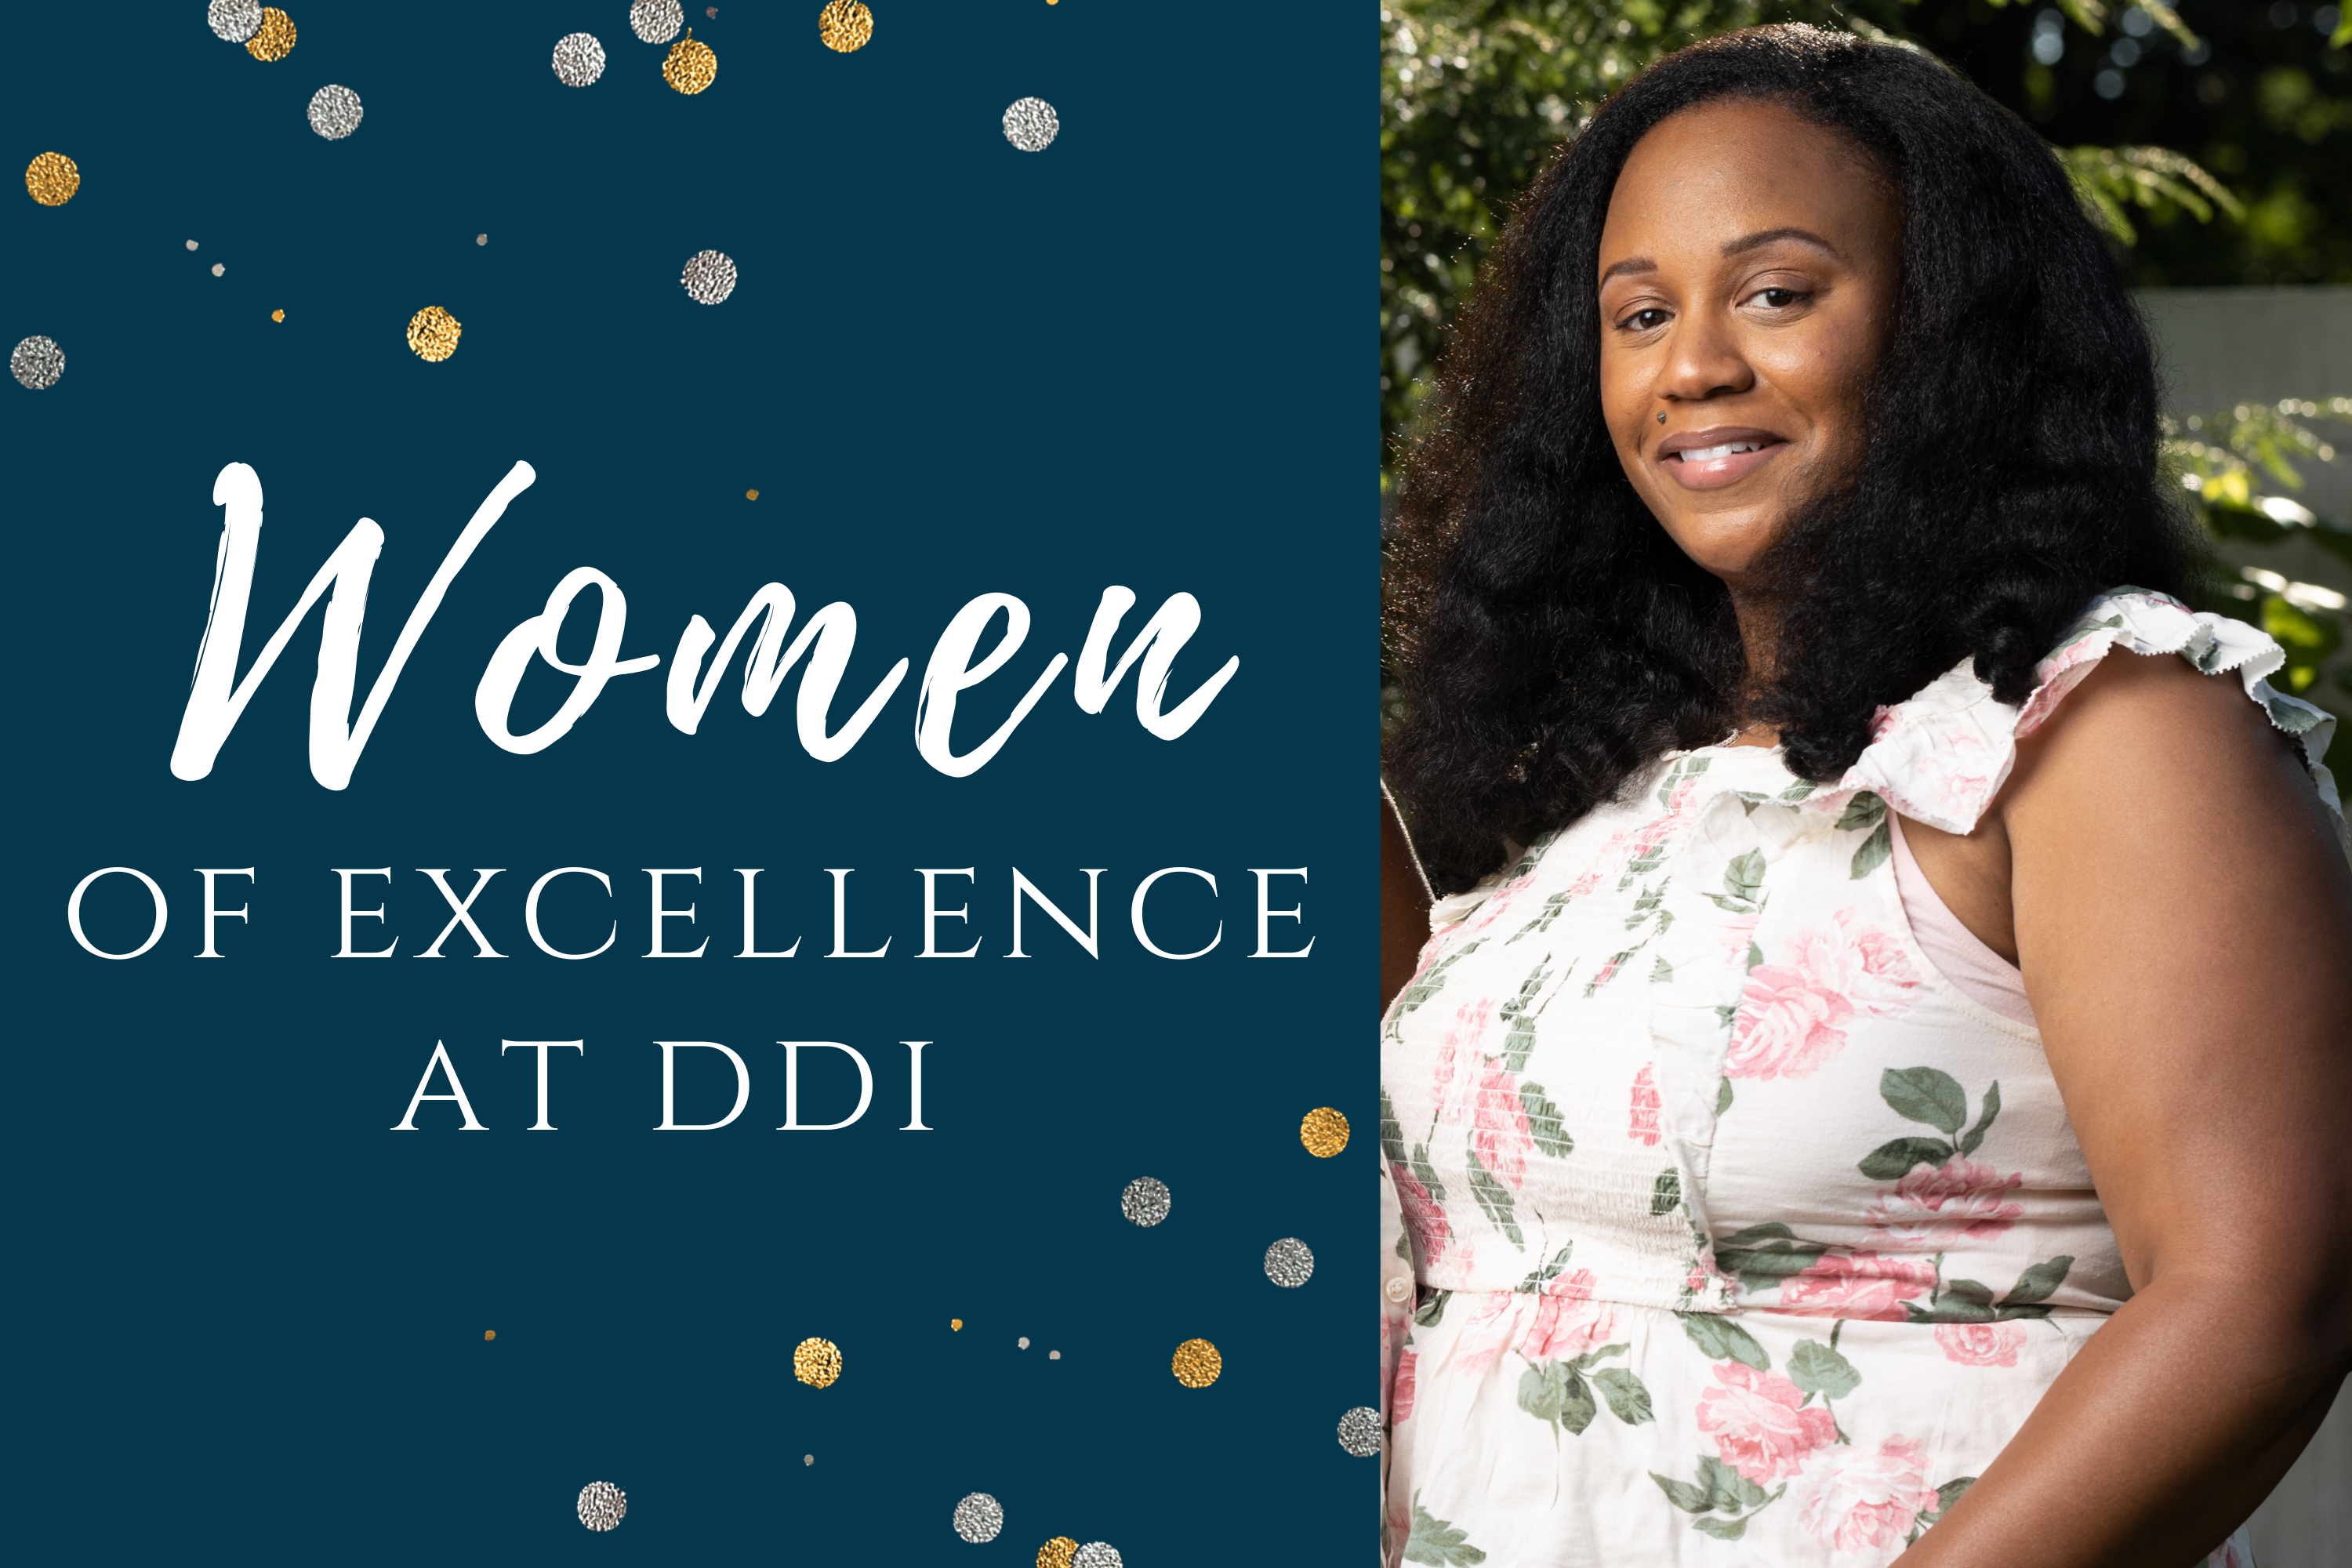 India Baulkman Women of Excellence at DDI